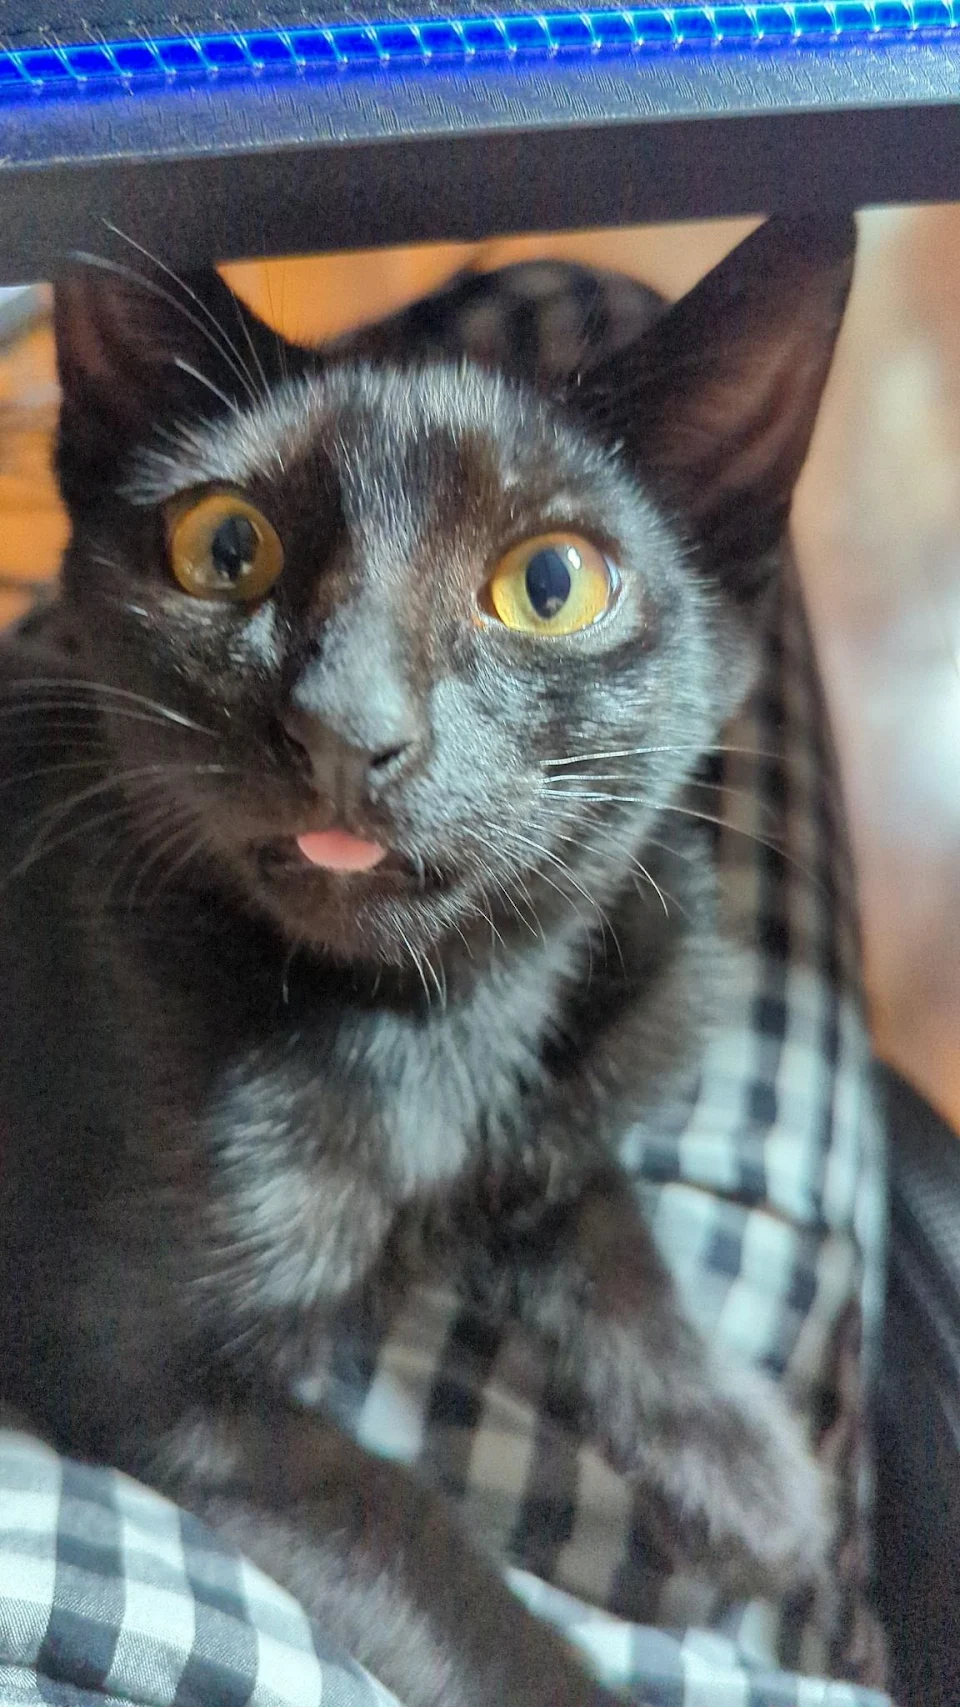 When you can't kitten properly, you derp.